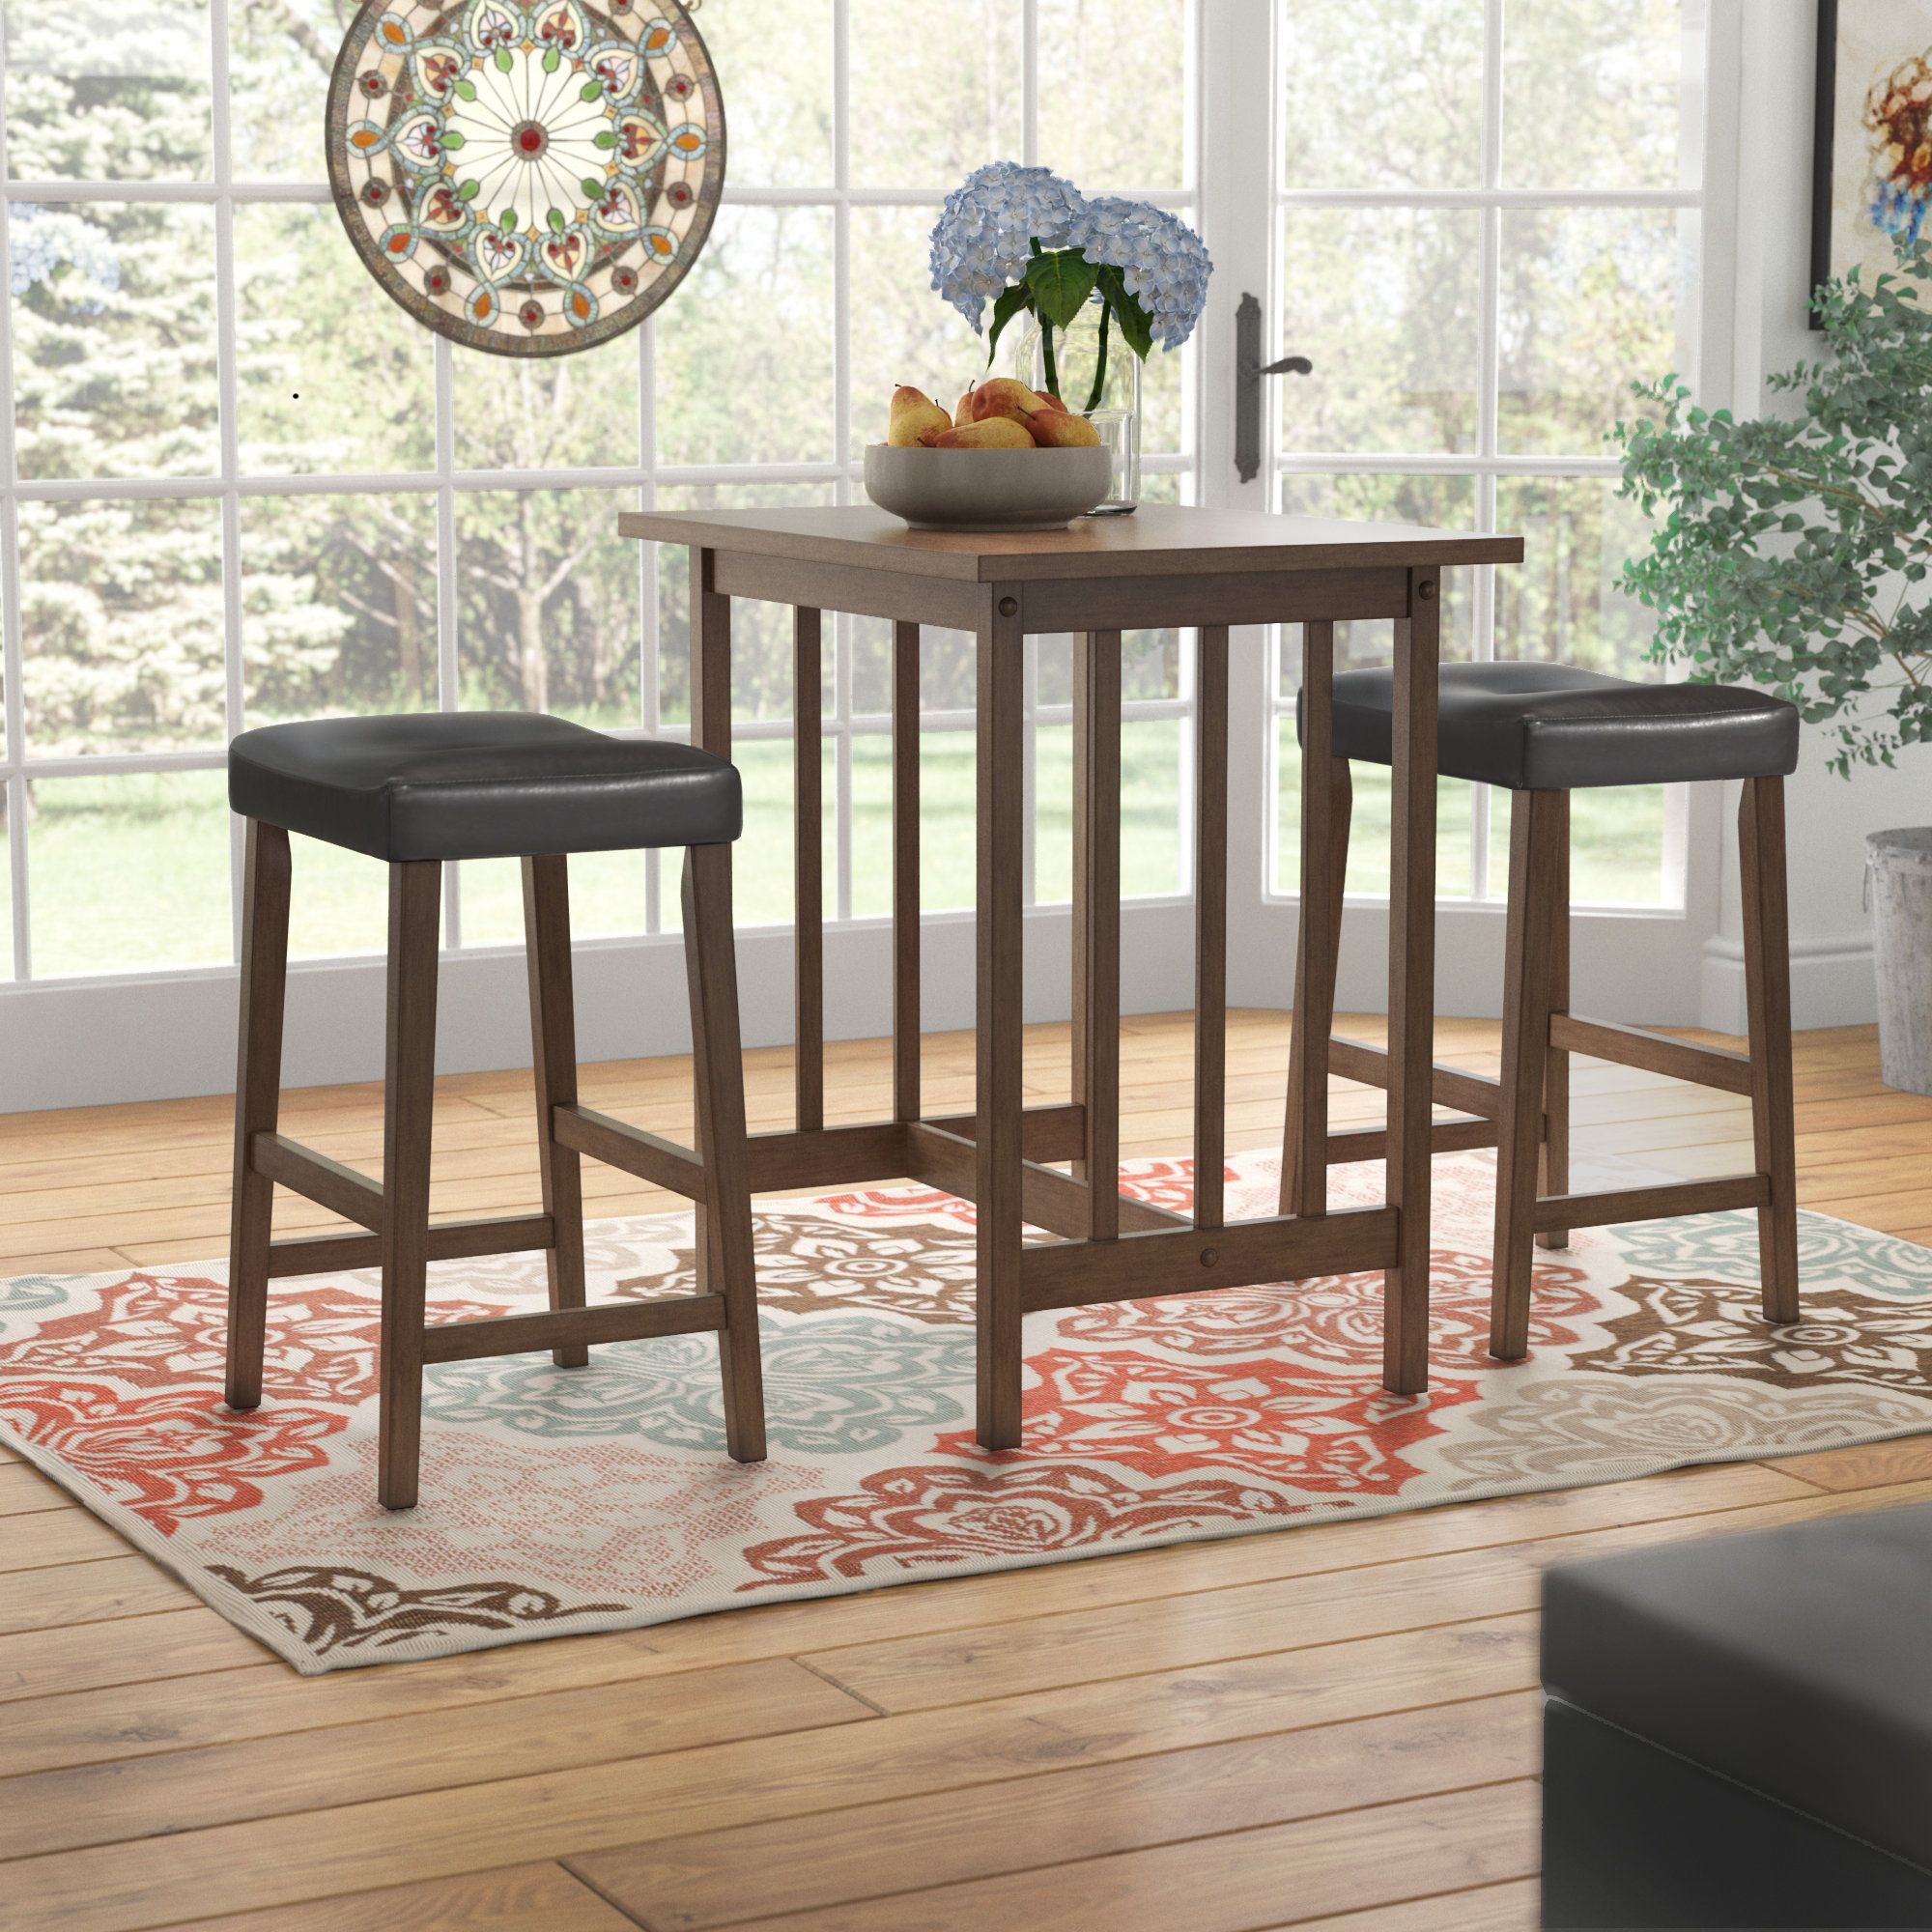 Featured Image of Hood Canal 3 Piece Dining Sets